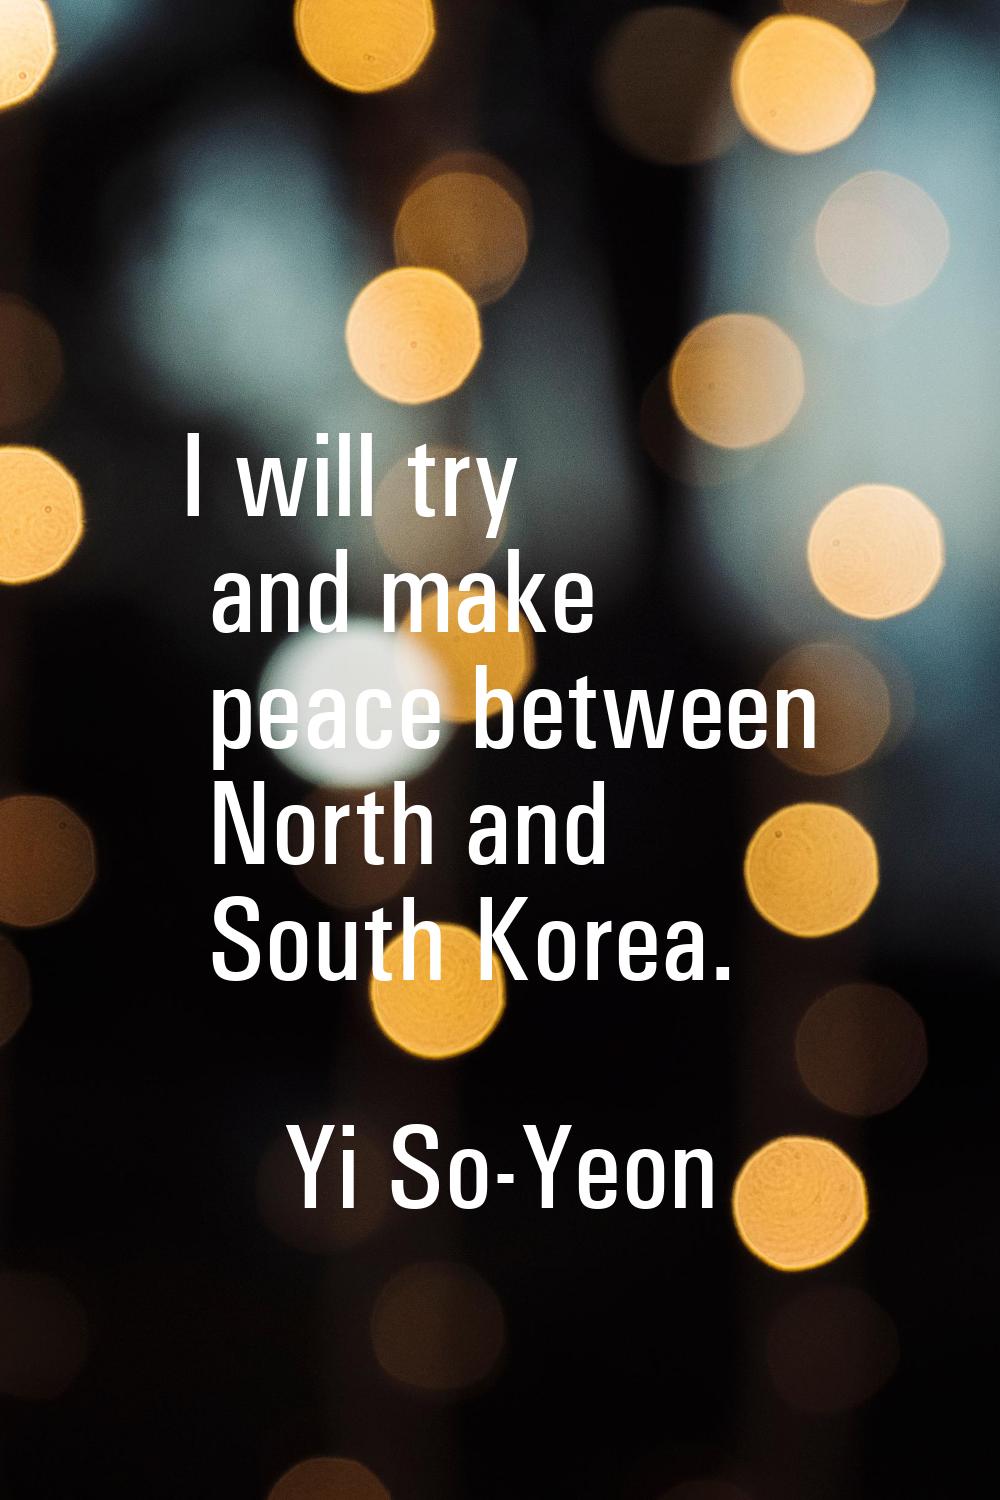 I will try and make peace between North and South Korea.